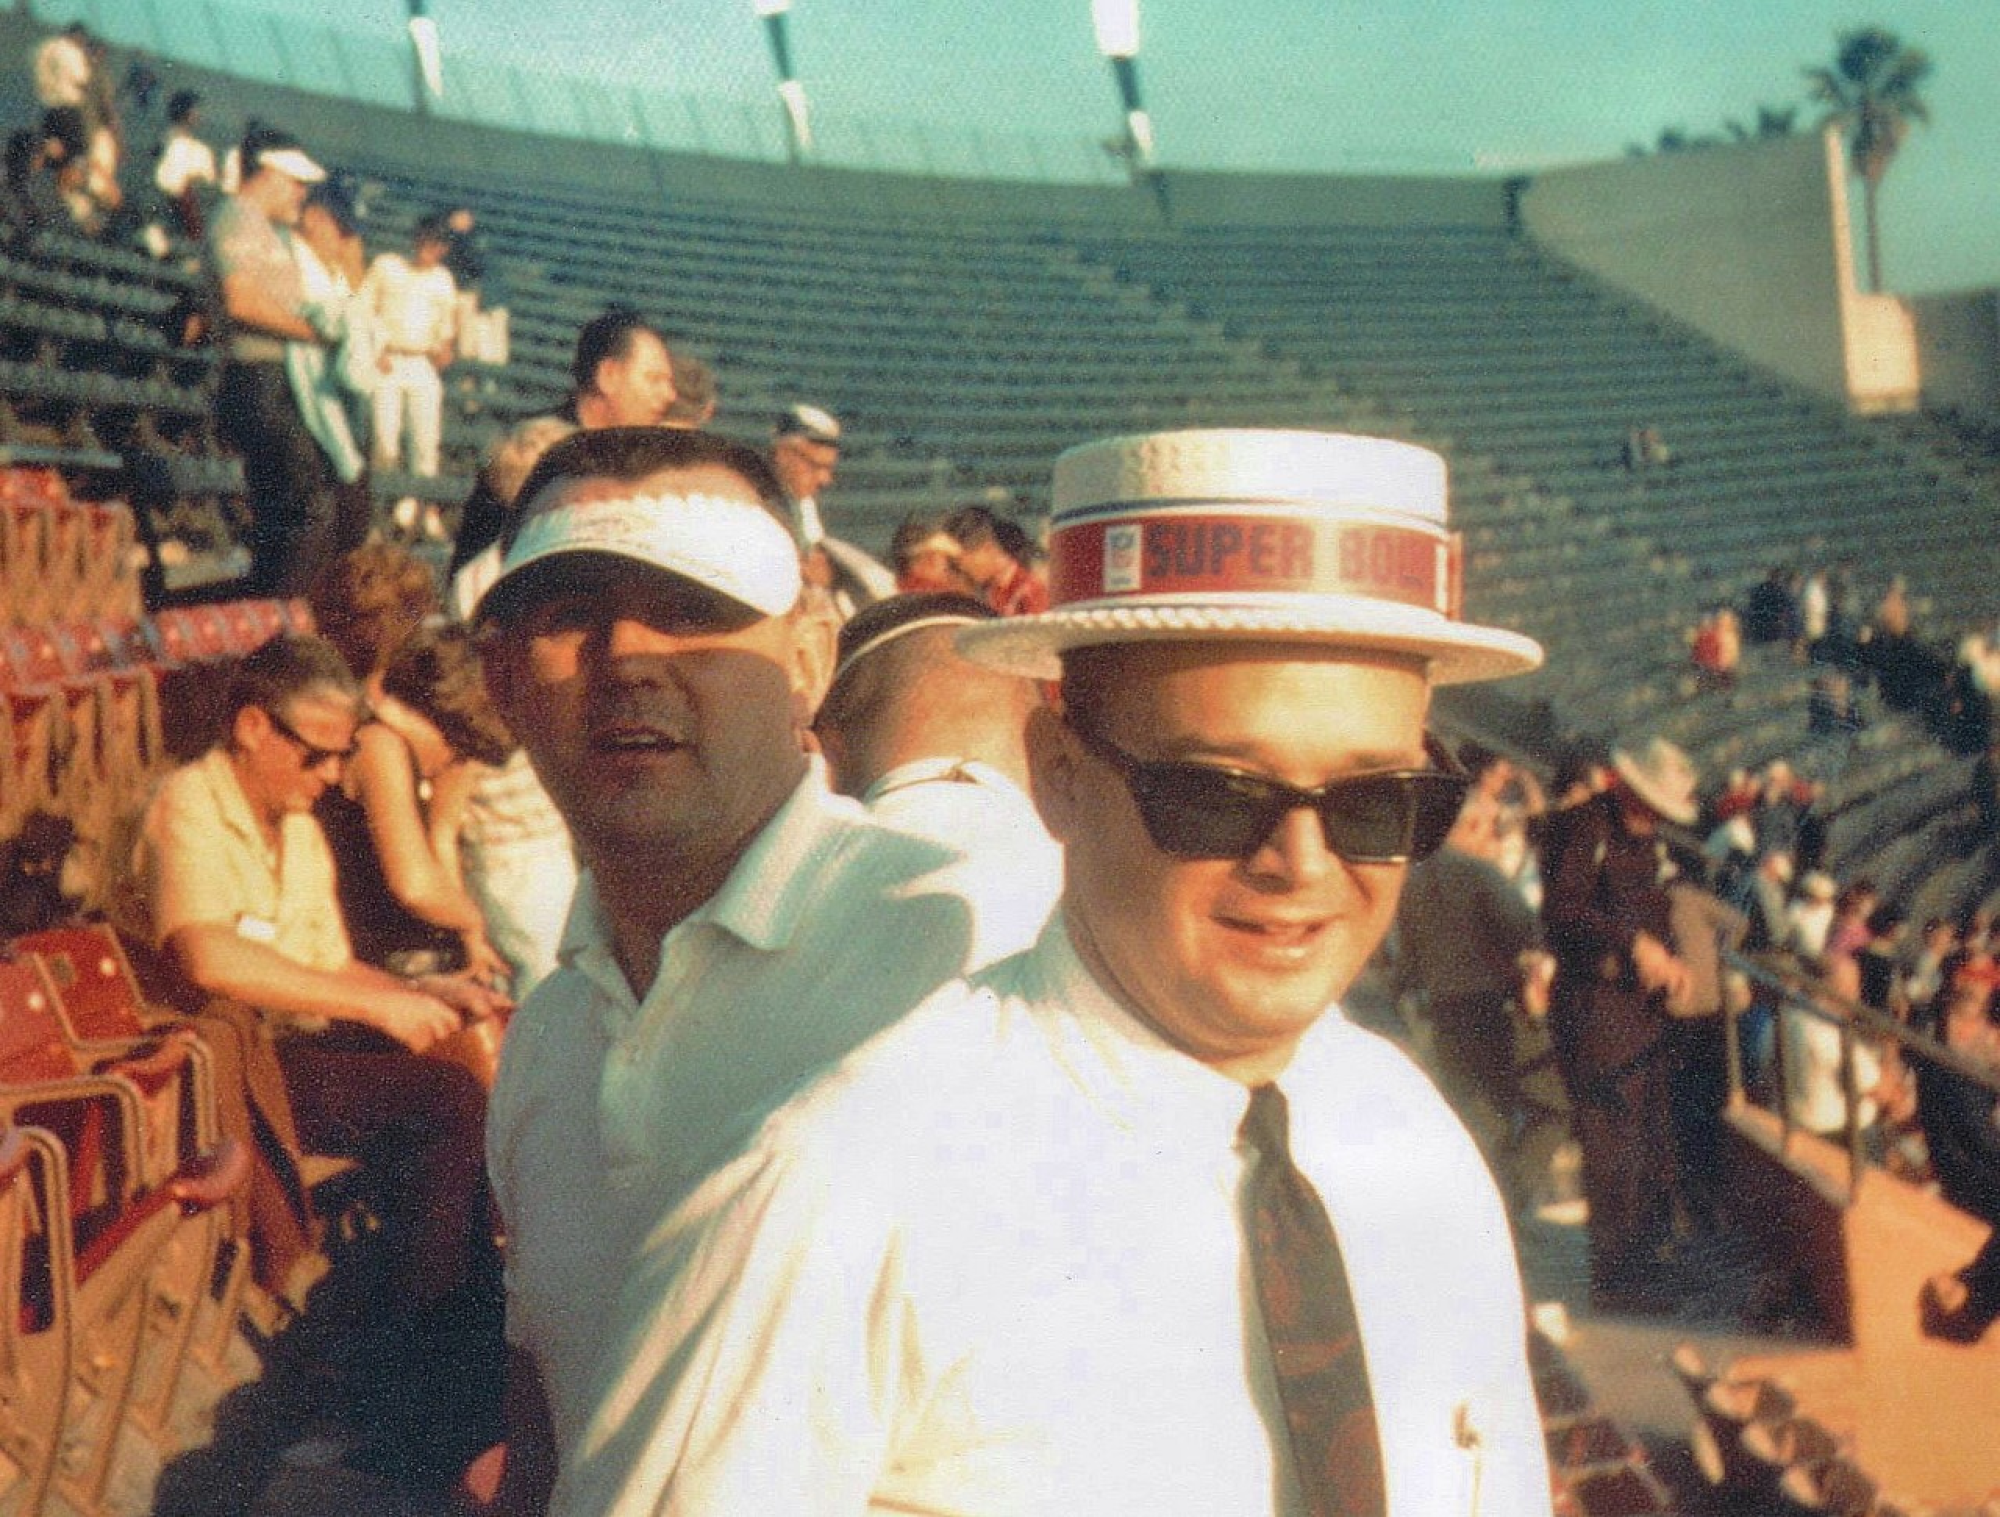 Stan Whitaker, left, and Don Crisman attend the first NFL-AFL Championship Game (Super Bowl I).